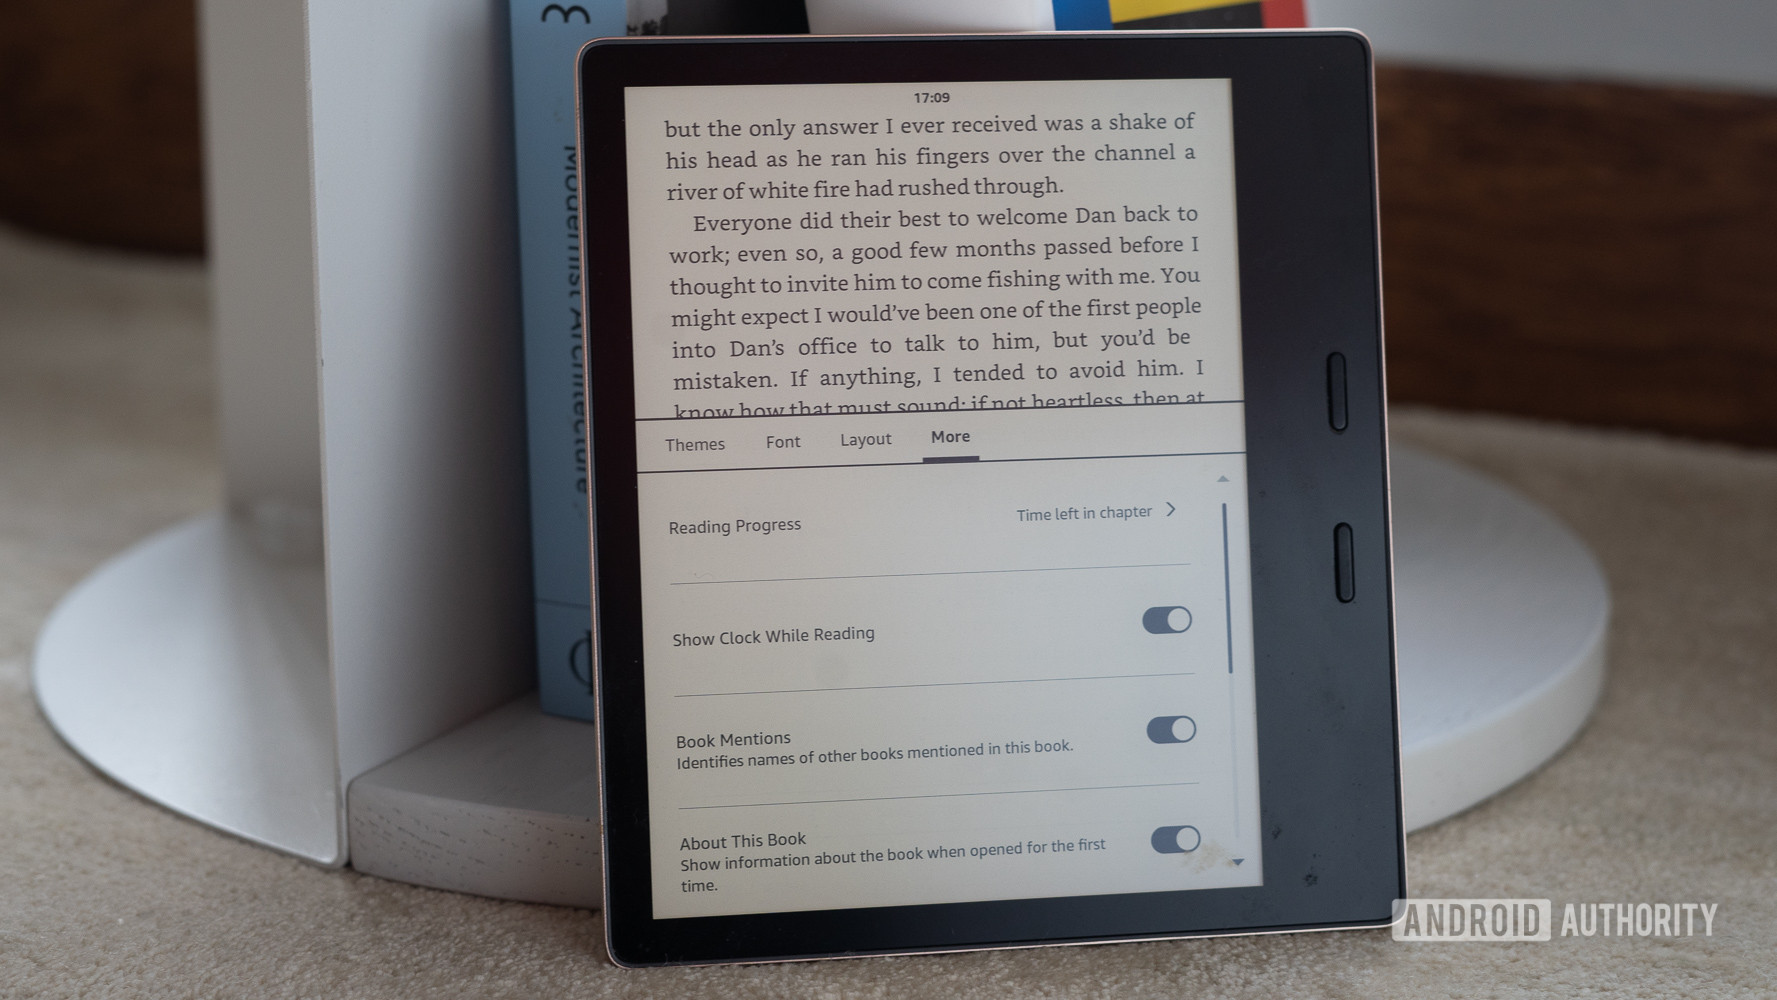 Amazon Kindle Tips show clock while reading